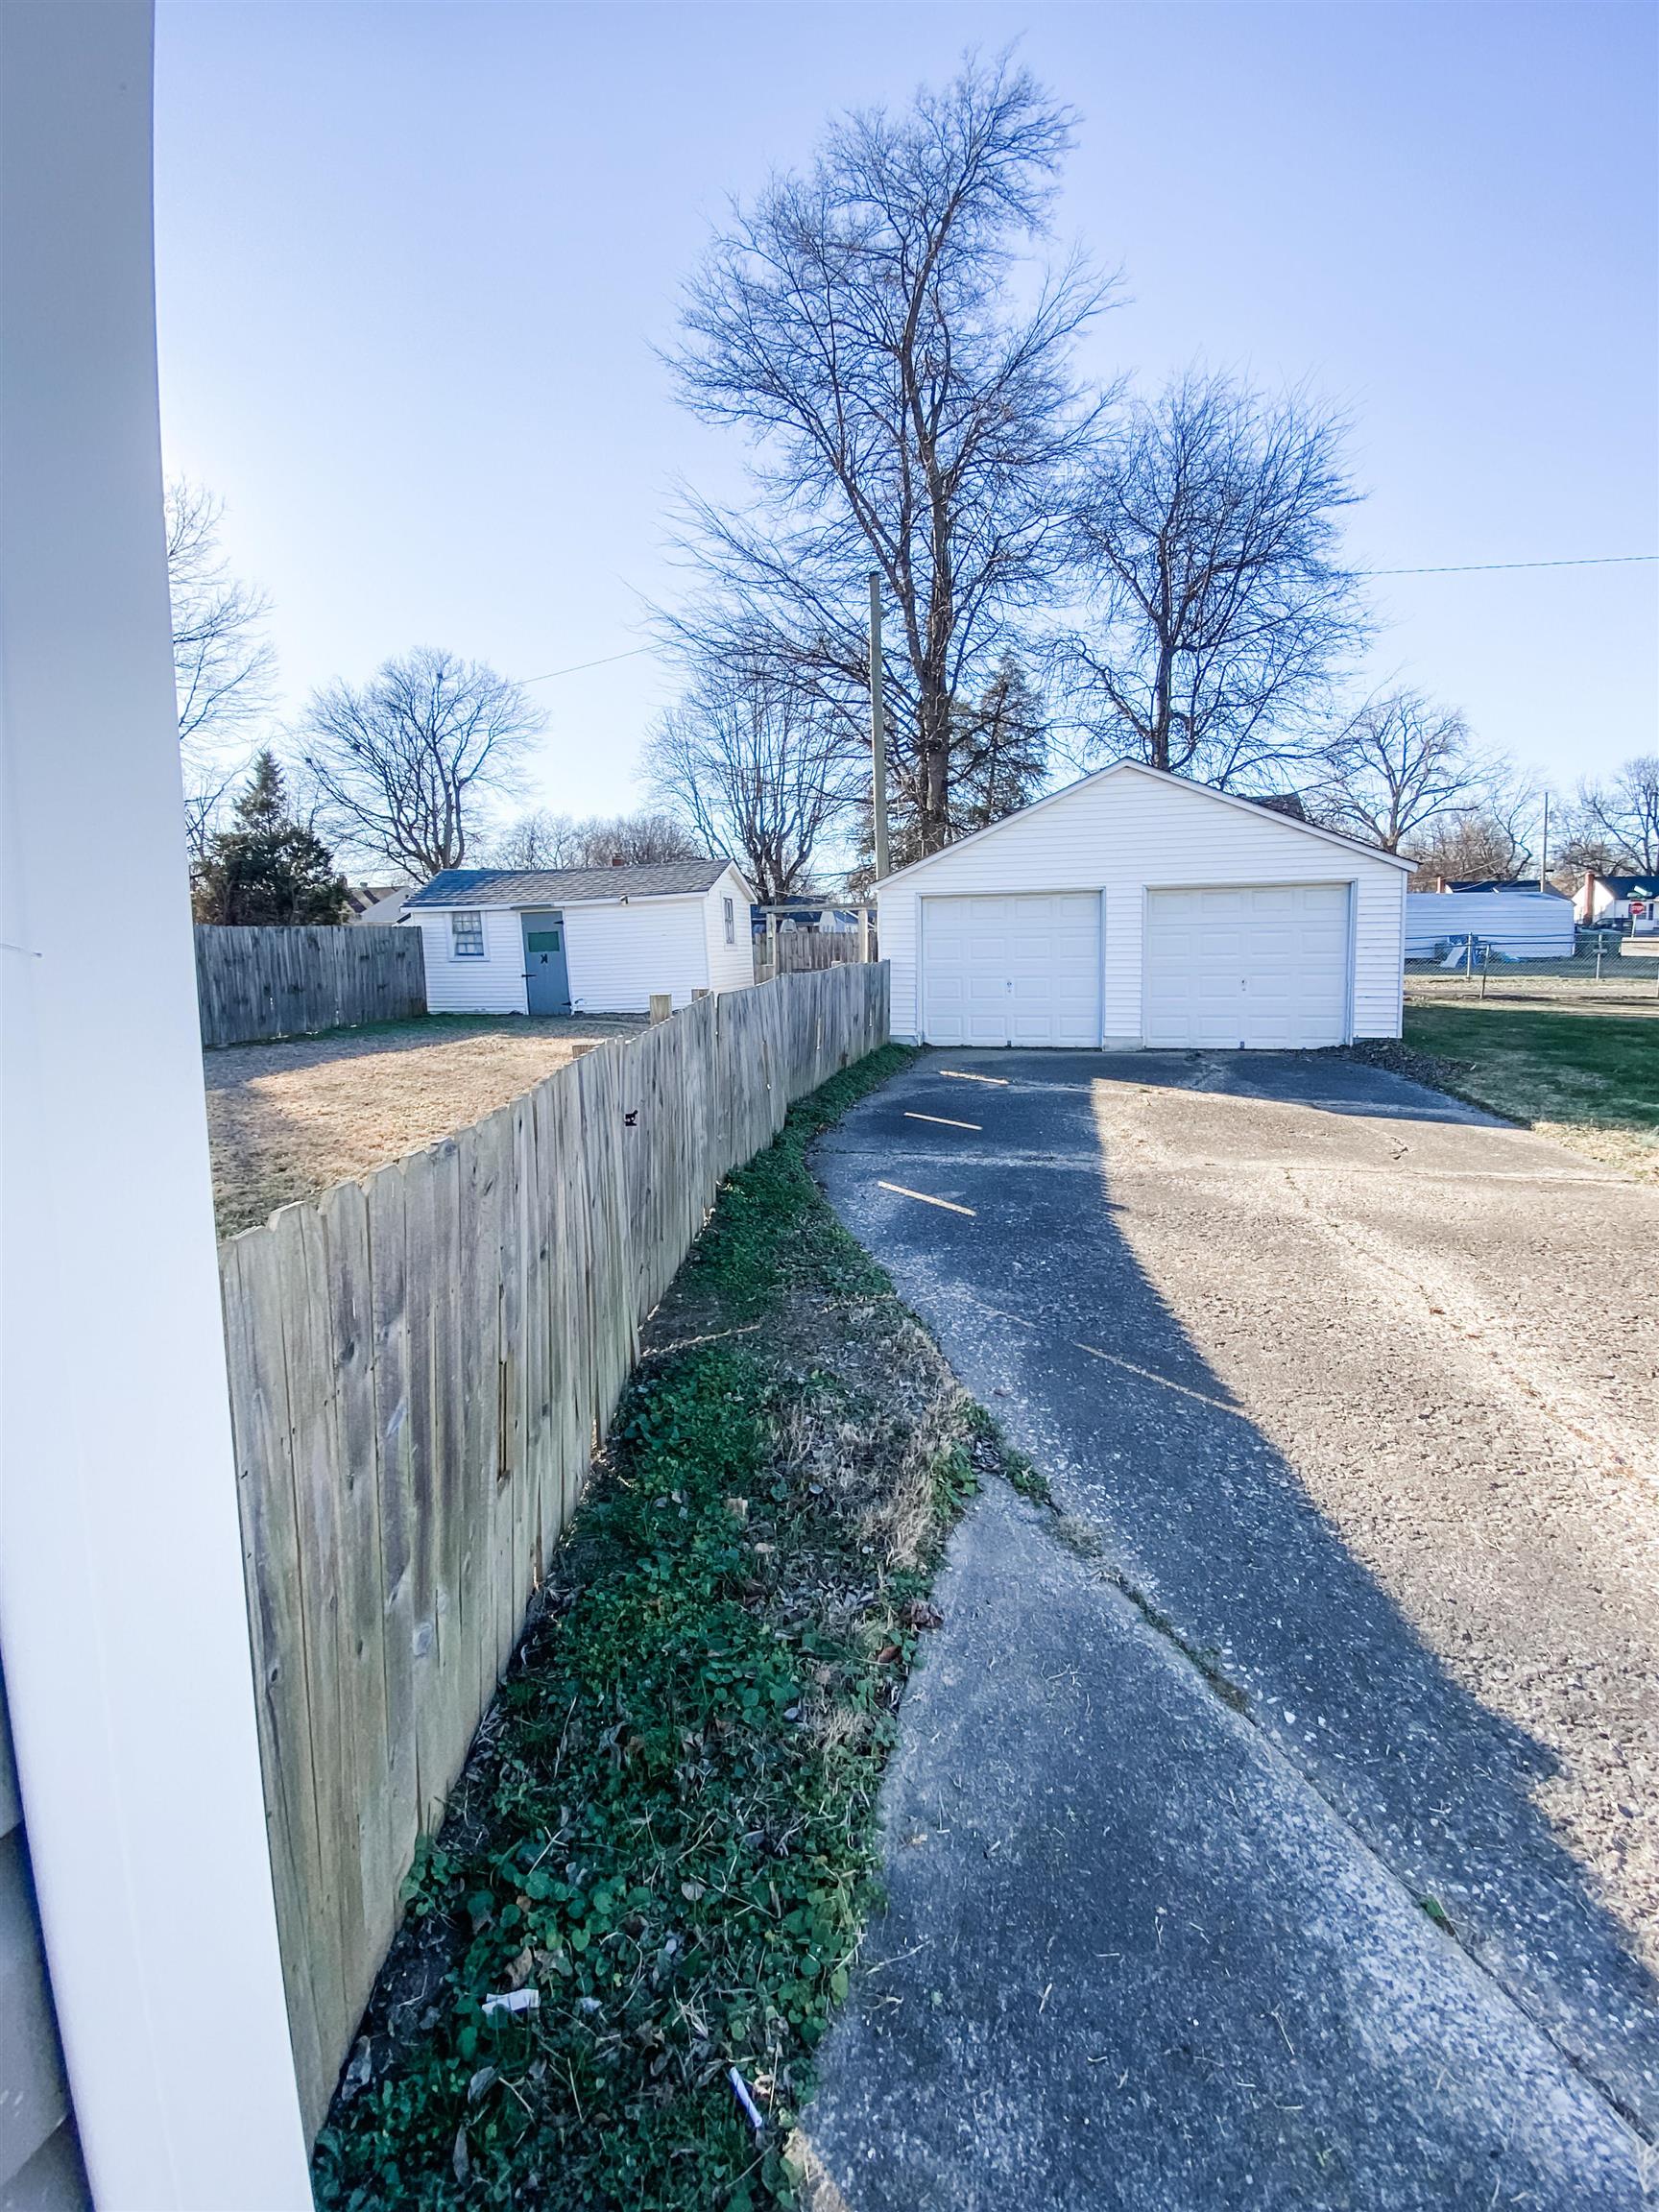 2006 Hall St, Owensboro, Kentucky 42303, 3 Bedrooms Bedrooms, ,2 BathroomsBathrooms,Single Family Residence,For Sale,Hall St,88649